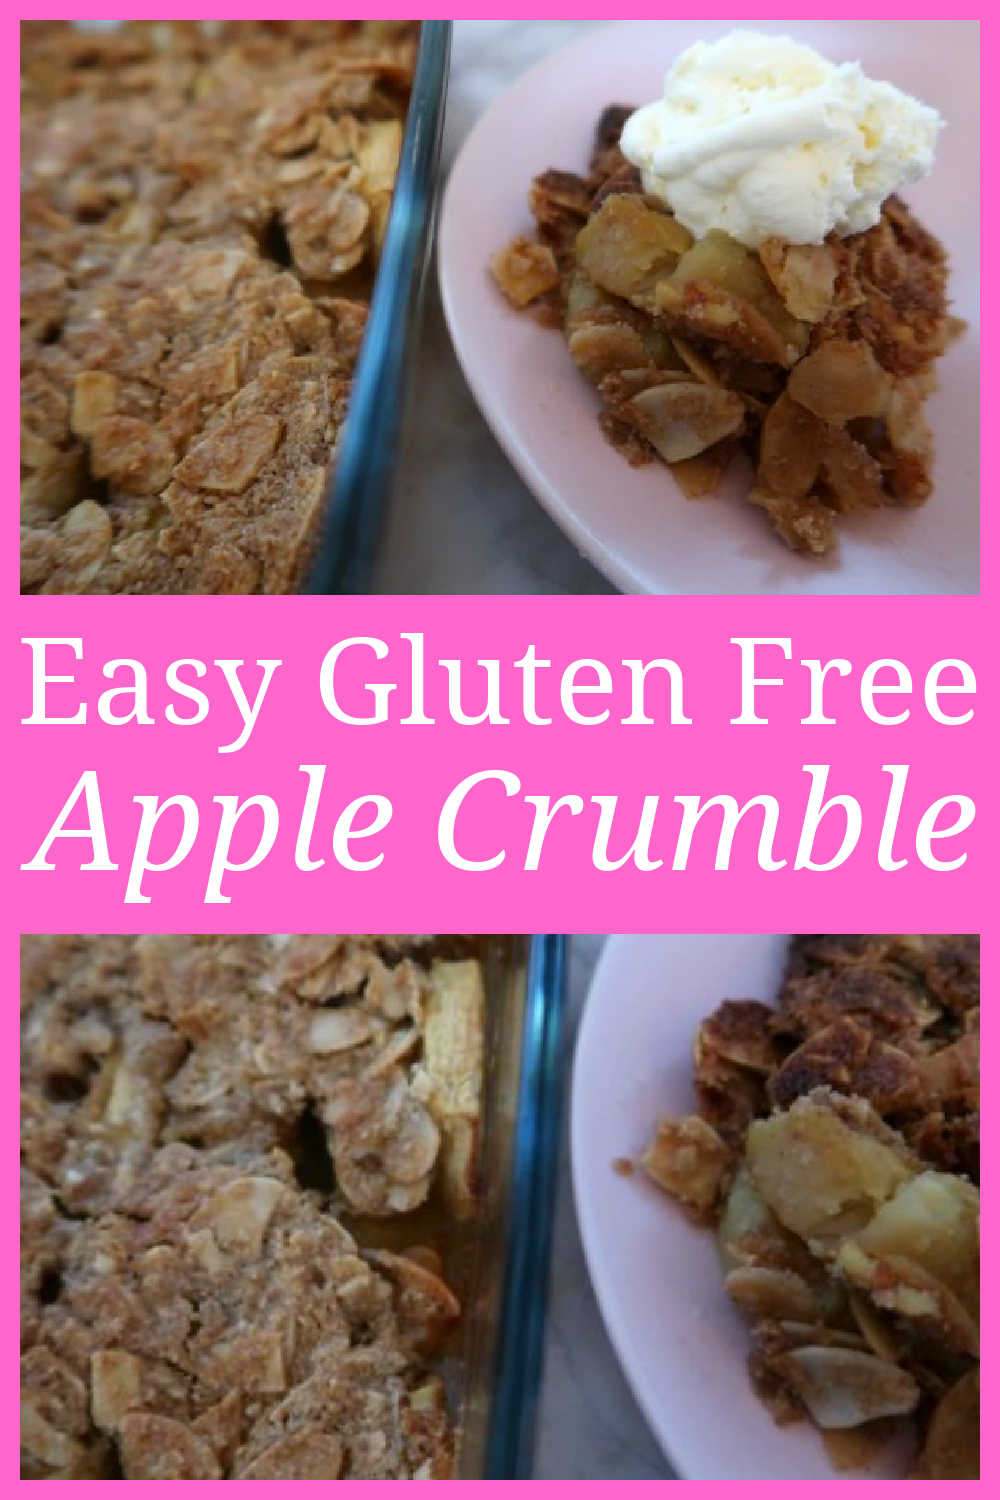 Gluten Free Apple Crumble Recipe - How to make an easy & healthy apple crisp with ground almonds - with tips to make it dairy free, vegan and paleo friendly - with the video tutorial.